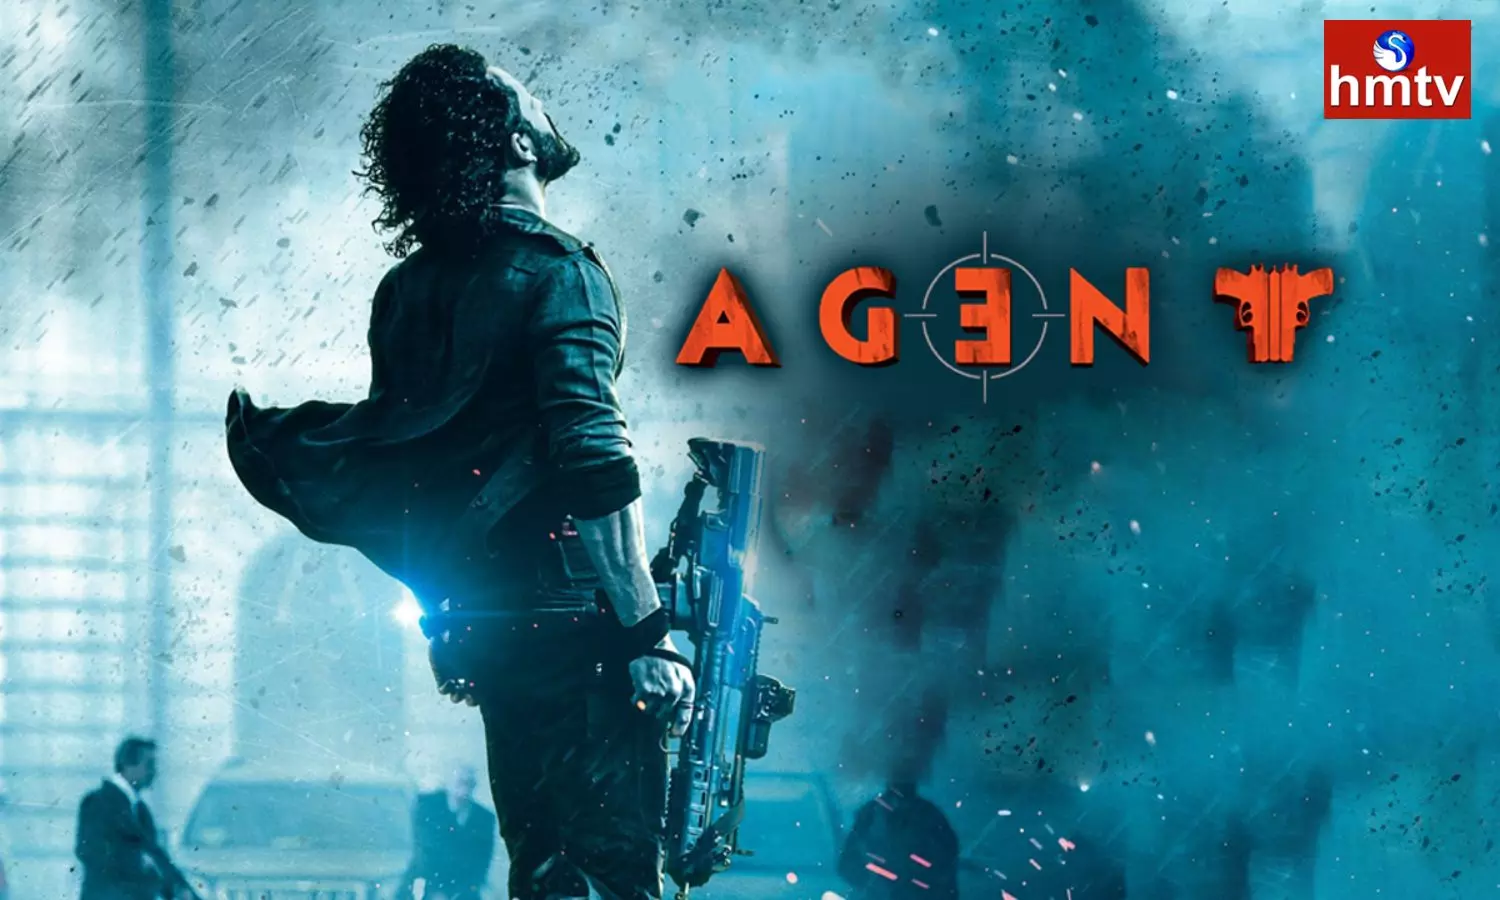 How Does the Agent Film Team Decide on Promotional Content?